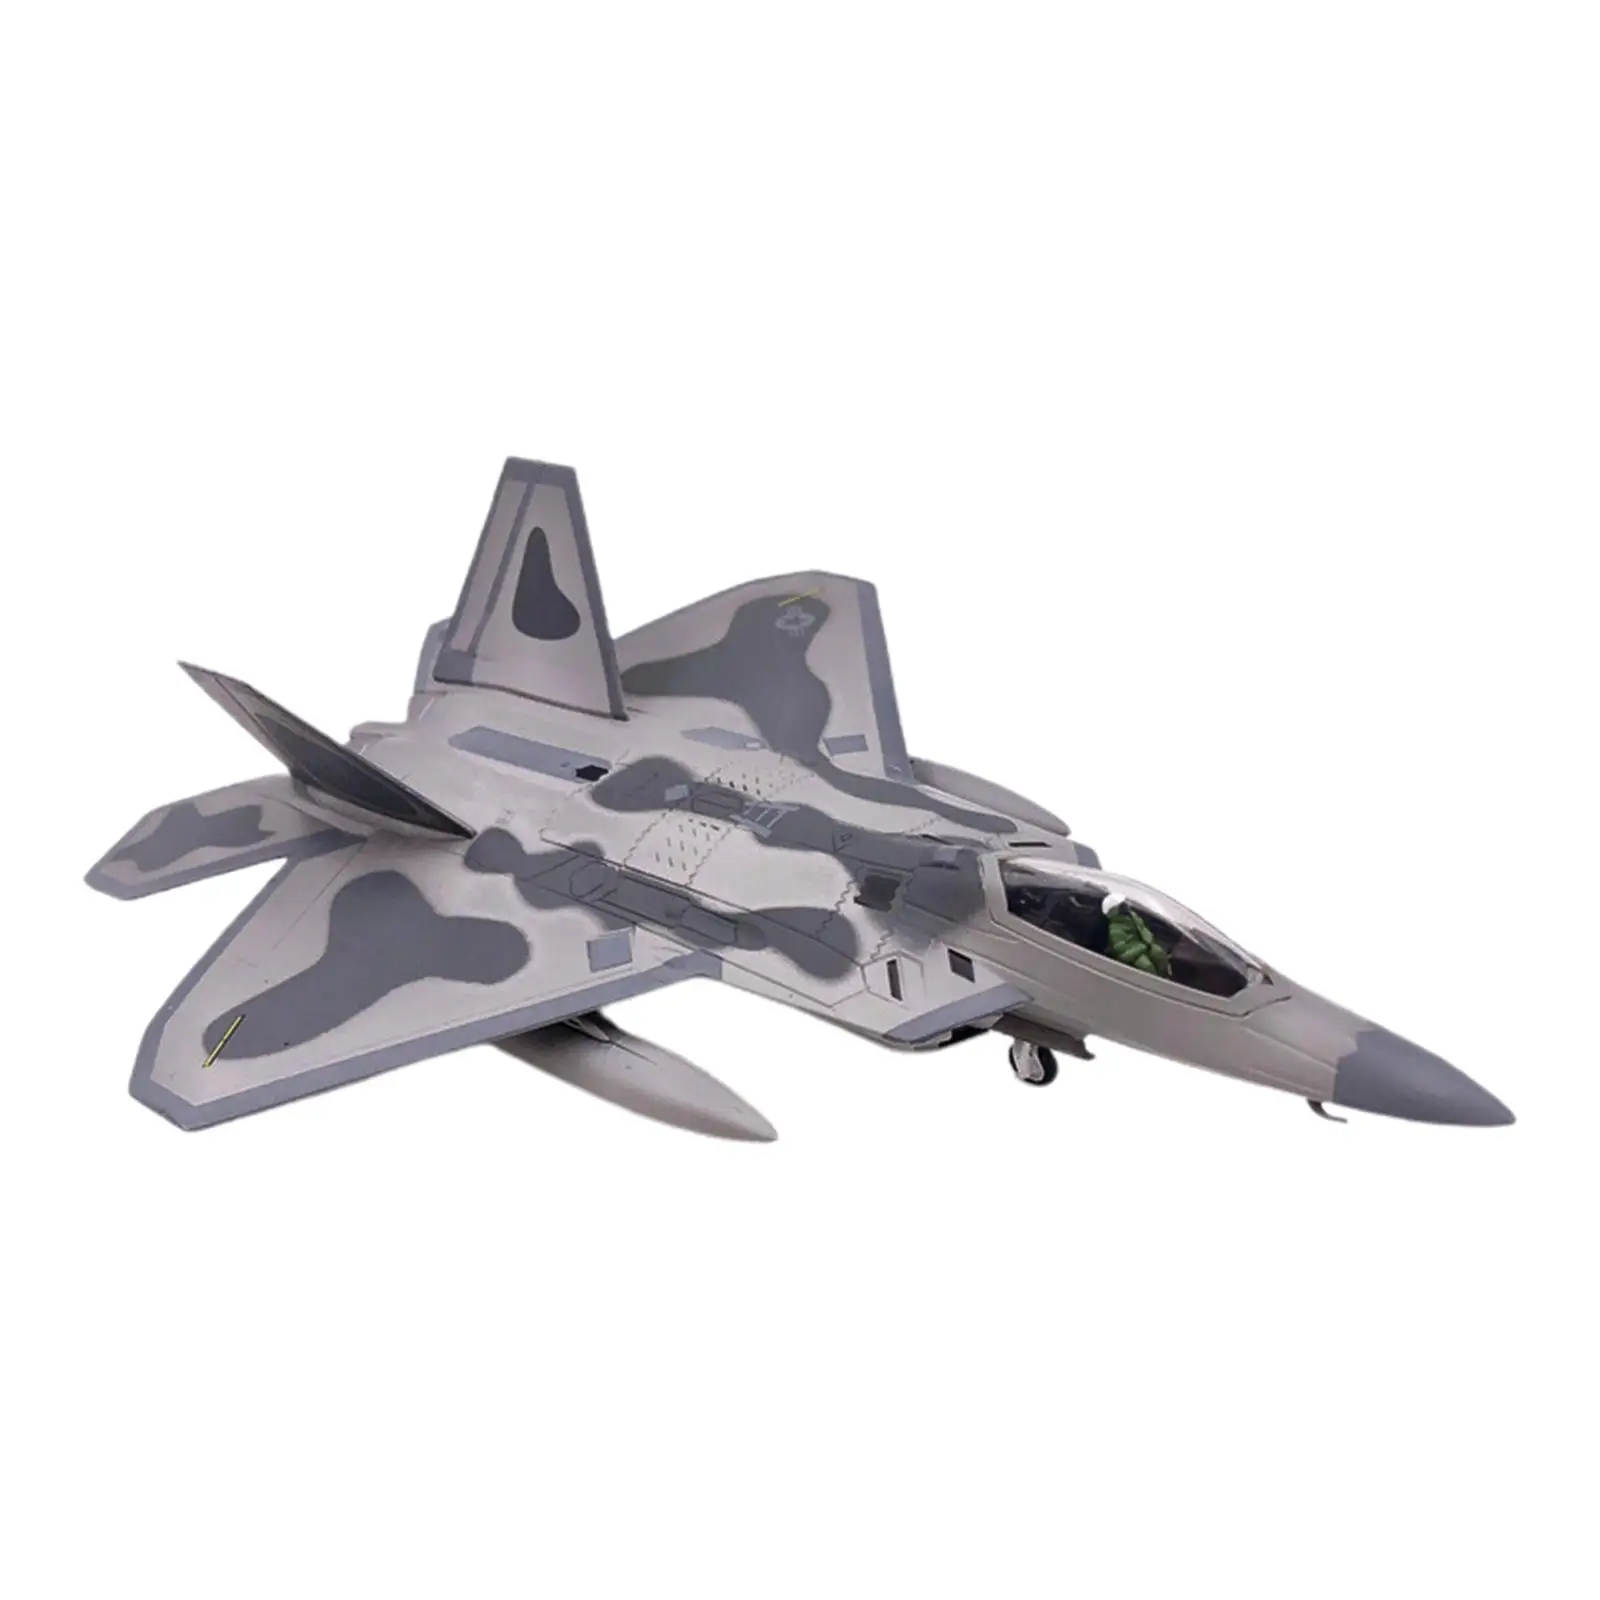 1/100 F22 Fighter Model with Stand Metal Diecast Model Plane Collection Gift